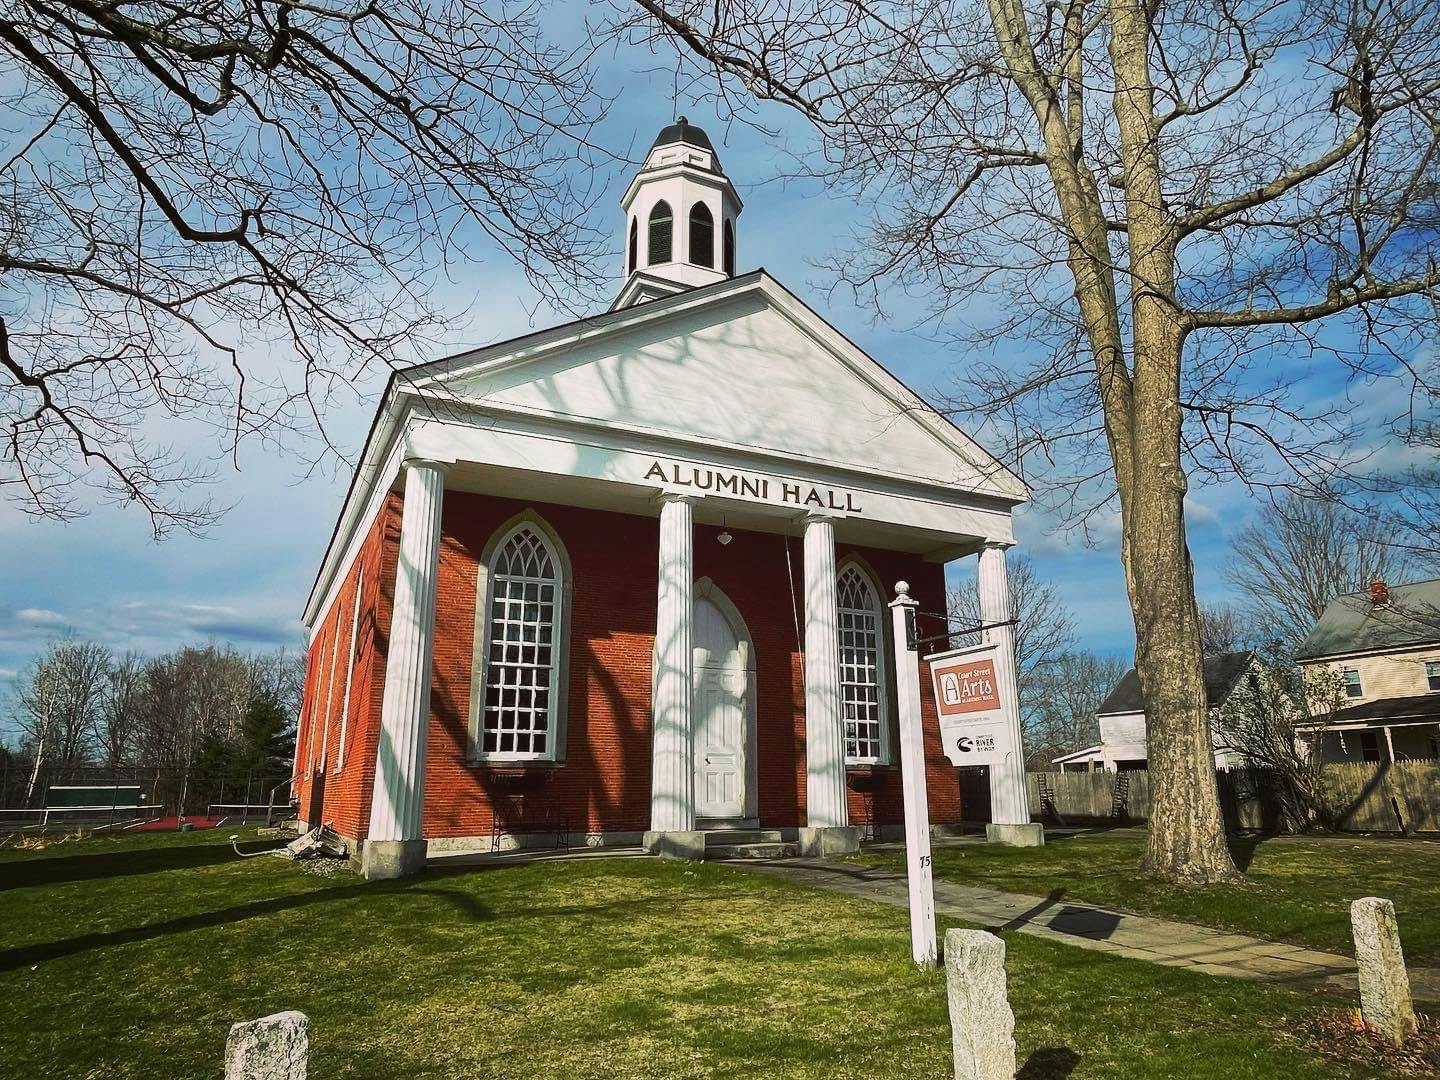 <p>Haverhill is a town and the seat of Grafton County, New Hampshire, United States. The population was 4,585 at the 2020 census. Haverhill includes the villages of Woodsville, Pike, and North Haverhill, the historic town center at Haverhill Corner, and the district of Mountain Lakes.</p><p><br></p><p>Haverhill was the first major colonial settlement in northern New Hampshire, founded in 1763 by soldiers of the French and Indian War who recognized it for its farming potential. It was incorporated in 1763 by colonial Governor Benning Wentworth, and in 1773 became the county seat of Grafton County1 Haverhill was the terminus of the old Province Road, which connected the northern and western settlements with the seacoast.</p><p><br></p><p><u>It is home to several historic and natural attractions, such as</u></p><p><br></p><p>The Haverhill–Bath Bridge, built in 1829, which is the oldest documented covered bridge in the country still standing.</p><p><br></p><p>The Haverhill Corner Historic District, which preserves a collection of 19th-century buildings that reflect the town’s civic and commercial importance.</p><p><br></p><p>The Bedell Bridge State Park, which features the site of a former suspension bridge that spanned the Connecticut River until it collapsed in 1979.</p><p><br></p><p>The Black Mountain State Forest, which offers hiking trails and scenic views of the White Mountains3</p><p><br></p><p>The Kinder Memorial Forest, which is a conservation area that protects a diverse ecosystem of wetlands, woodlands, and wildlife.</p><p><br></p><p>The Oliverian Valley Wildlife Preserve, which is a sanctuary for rare and endangered species of plants and animals.</p><p><br></p><p>Haverhill is also known for hosting the annual North Haverhill Fair, which is a traditional agricultural fair that dates back to 1946. The fair features livestock shows, carnival rides, live entertainment, and local food.</p><p><br></p><p>Today, Haverhill has a branch of the New Hampshire Community Technical Colleges, which offers various programs and courses for students and adults. The town also has a public library, a historical society, and several churches.</p><p><br></p><p>It is a town with a rich history, a vibrant culture, and a beautiful landscape. It is a great place to visit, live, and learn.</p>